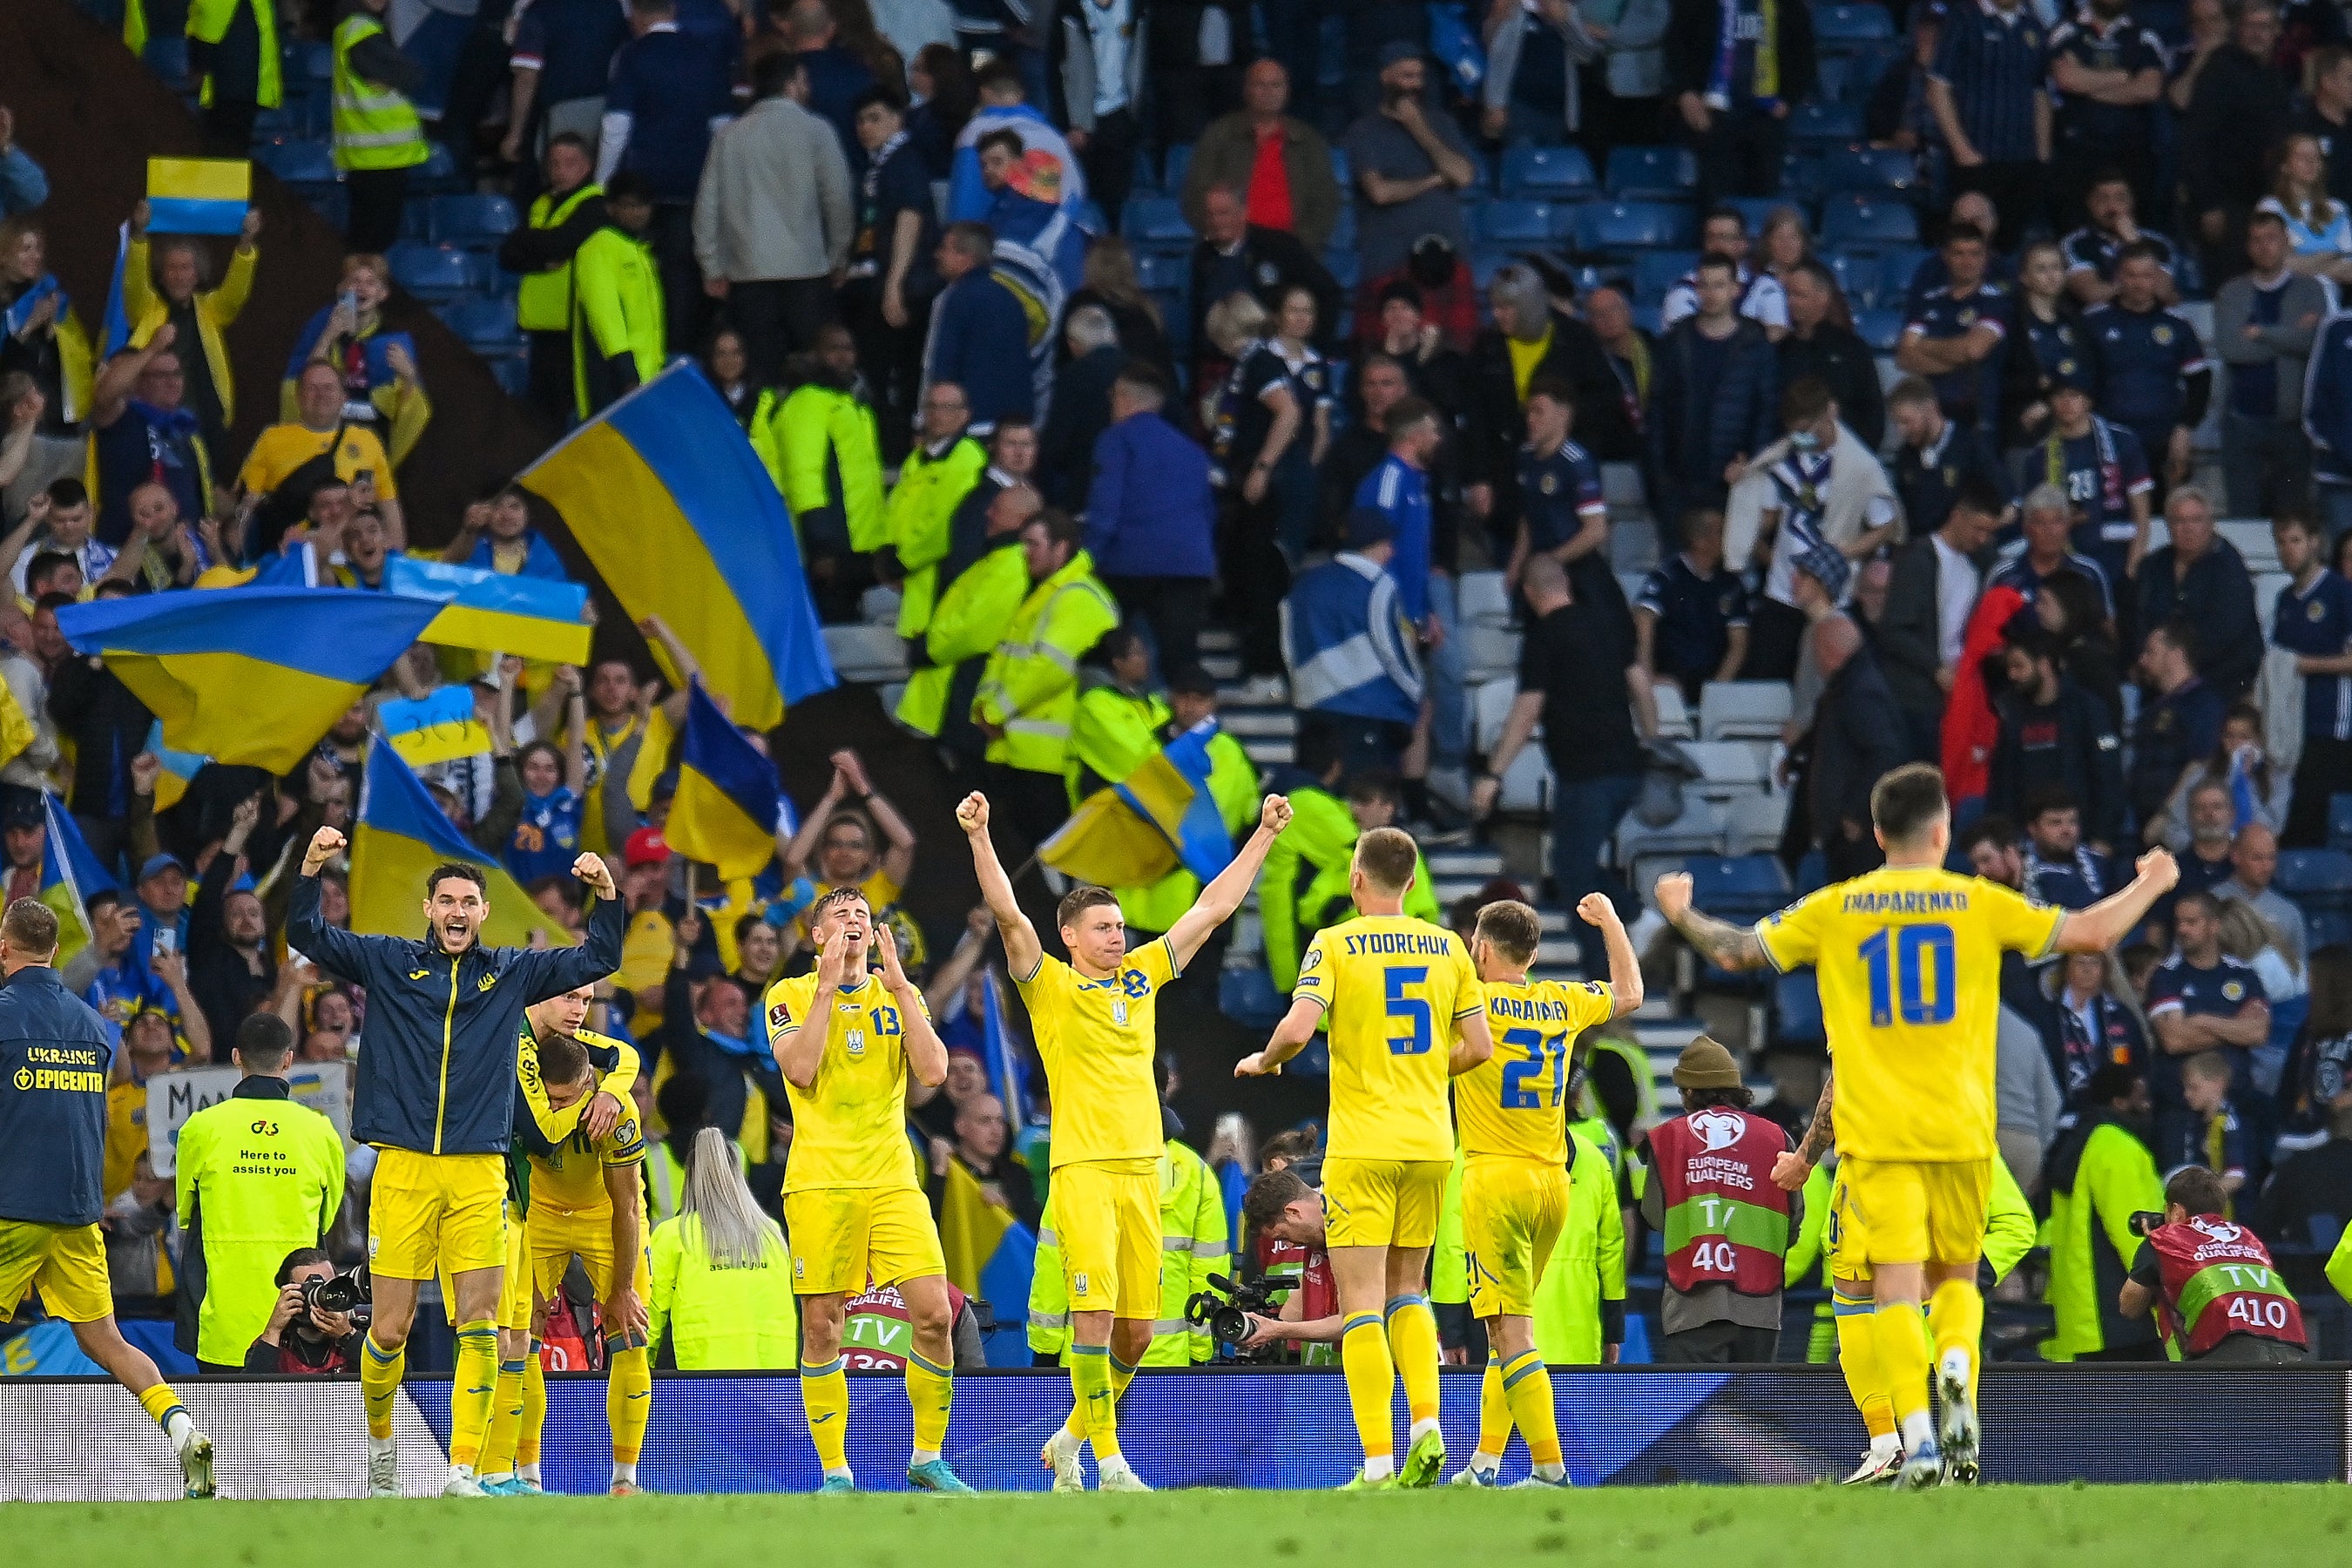 The Ukrainian team celebrate at the final whistle (Malcolm Mackenzie/PA)